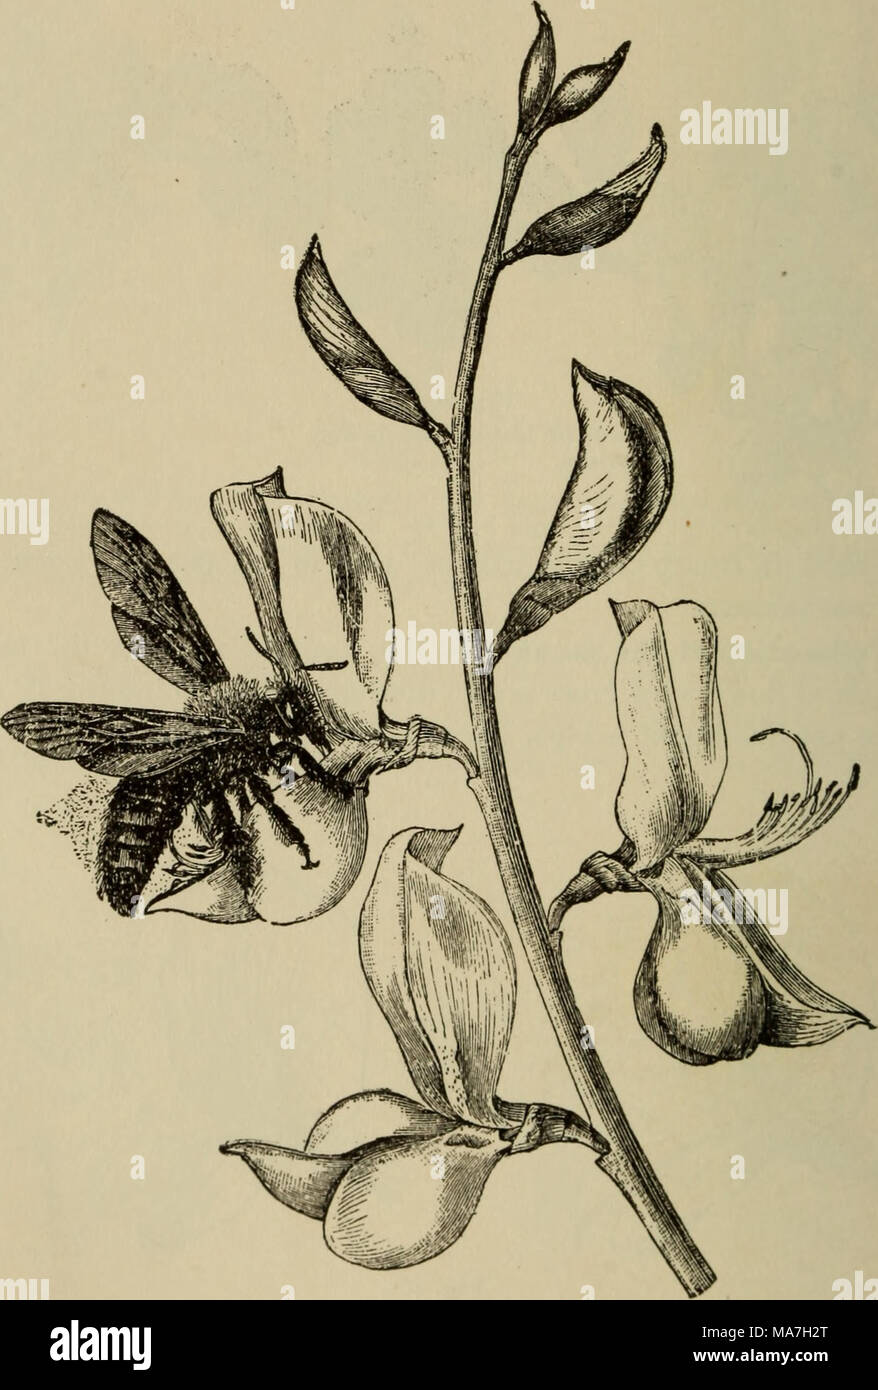 . Elementary botany . Fig. 463. Spartium, showing the dusting of the pollen through the opening keels on the under side of an insect. ( From kerner and ()liver. 1 665. The ovary lias three locales, and the three styles are usually united into a Long, thin, strap-shaped style, as seen in the figure, though in some cases three, nearly distinct, filamentous styles are present. The end of this strap-shaped style has a peculiar curve on one side-, the outline being some- Stock Photo